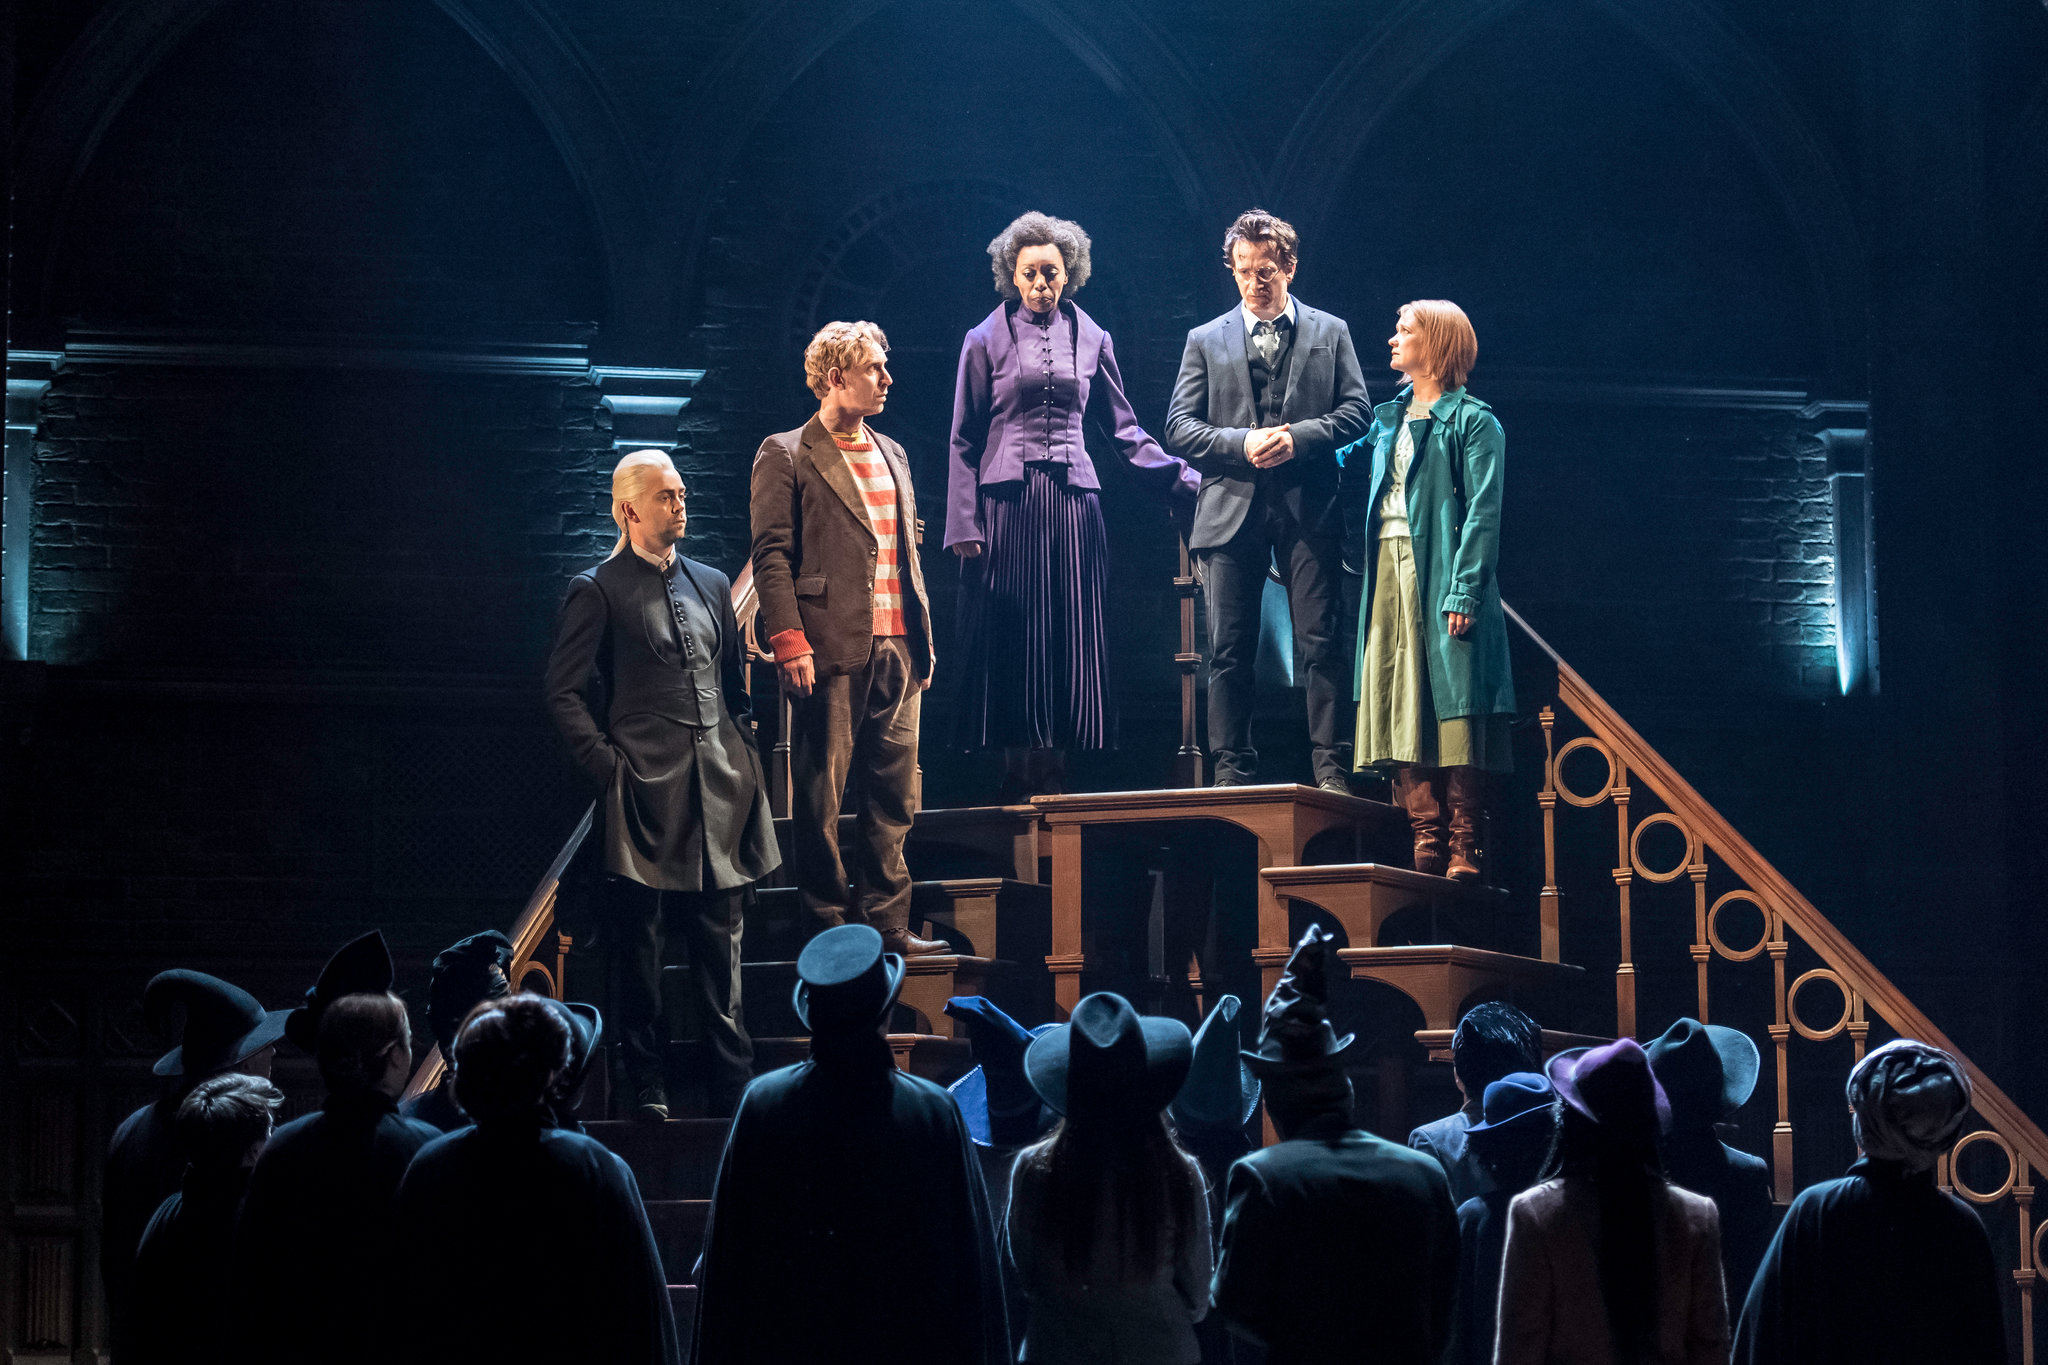 Harry Potter and the Cursed Child - Part 1 & 2 (9/3 7:30PM & 9/4 7:30PM) at Lyric Theatre